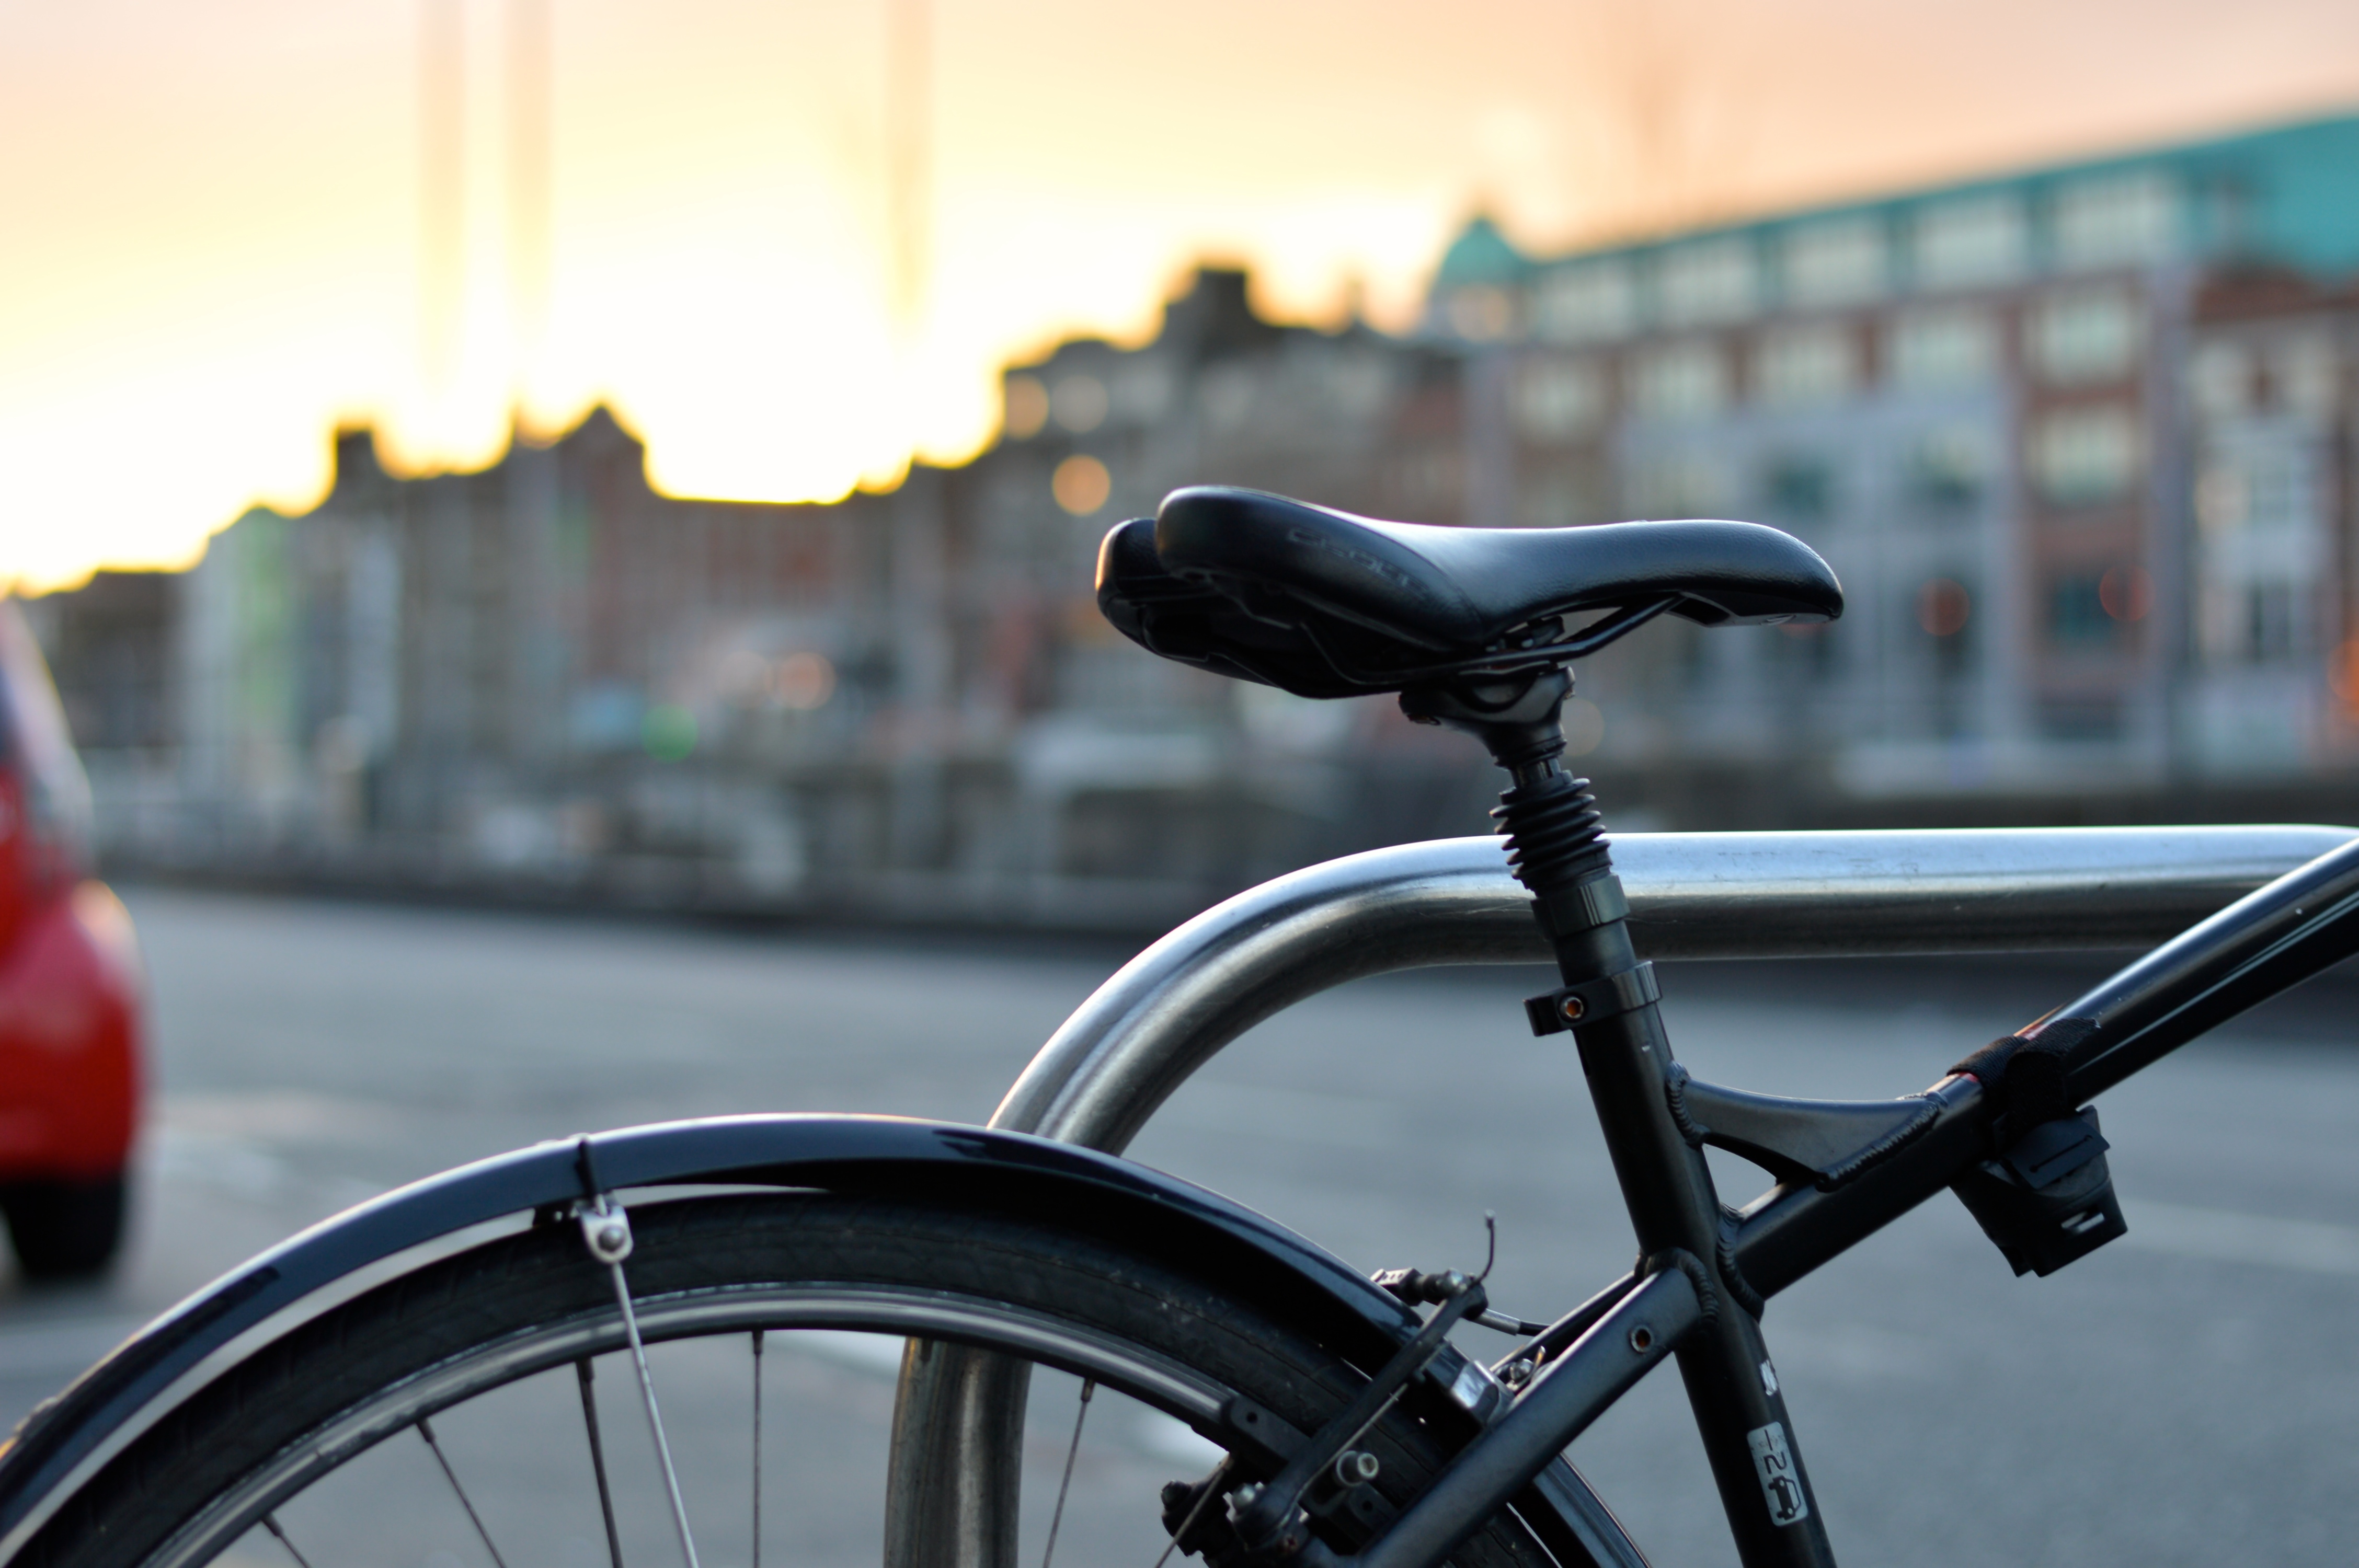 Bicycle in City, Animal, Bicycle, Bicycle seat, Bike, HQ Photo